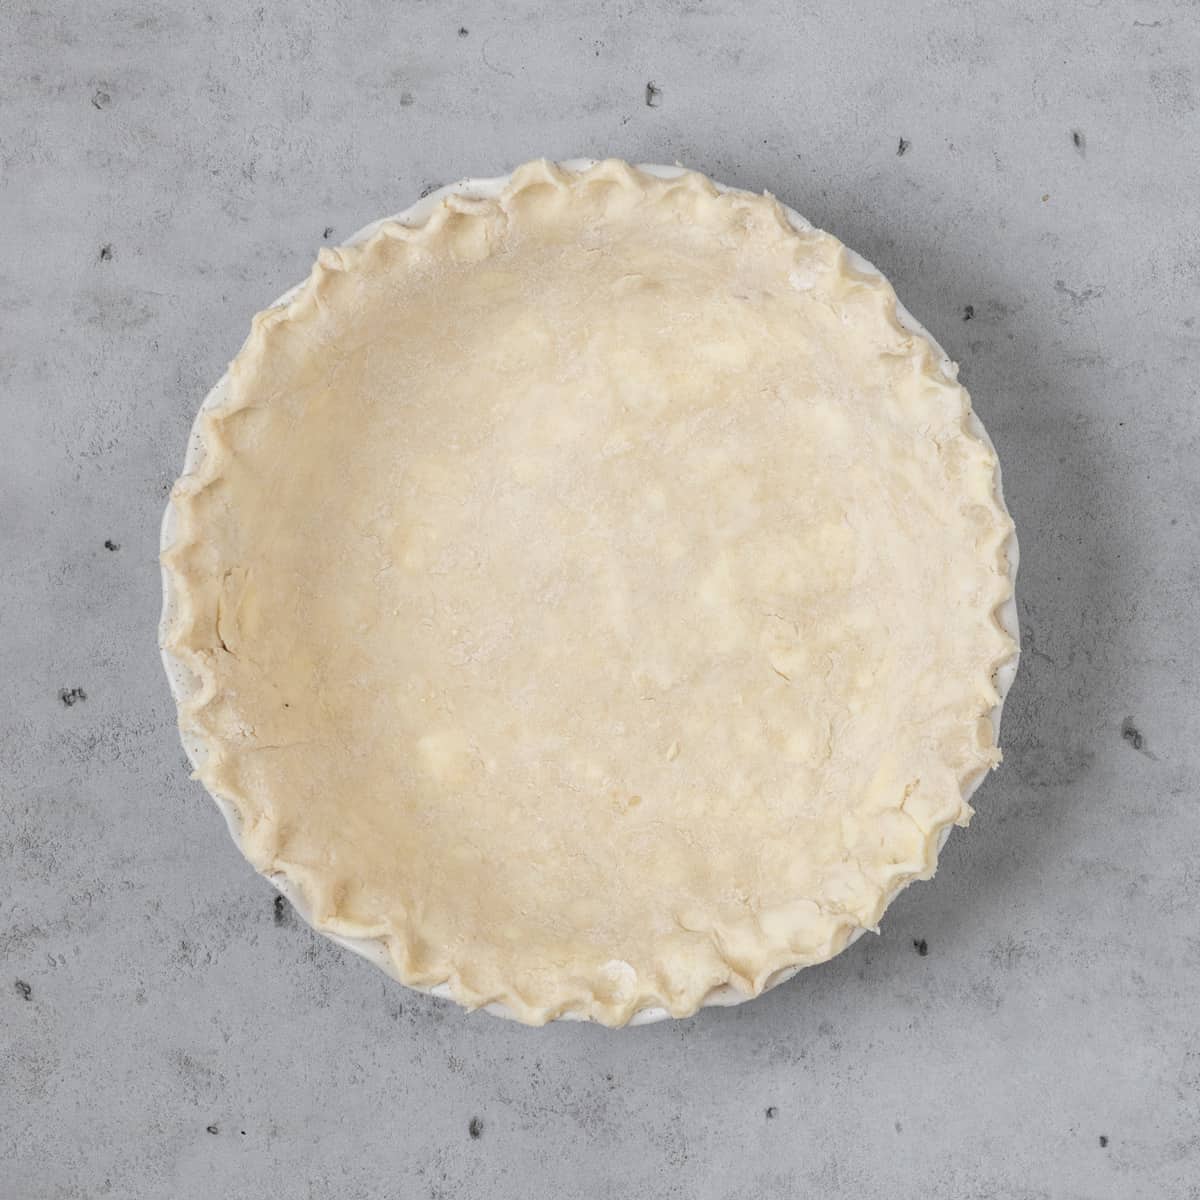 the pie dough pressed into a pie dish before being baked on a grey background